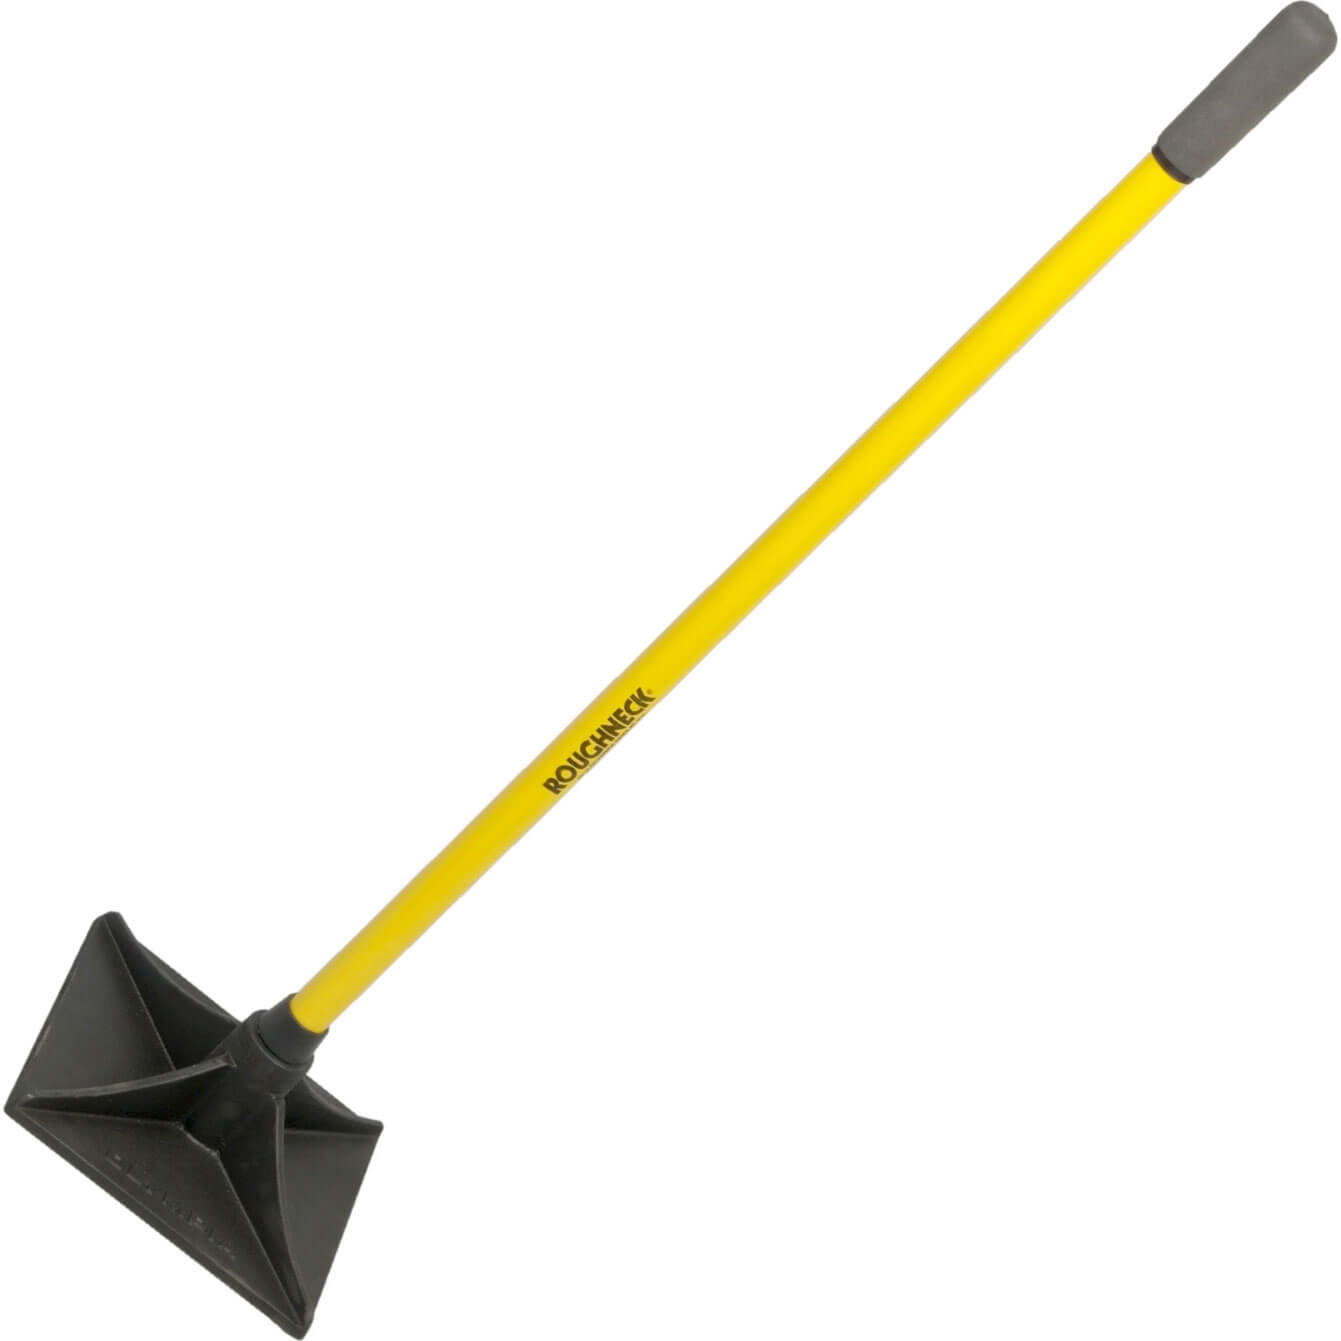 Roughneck Tamper Earth Rammer with Fibreglass Handle 10" x 10"